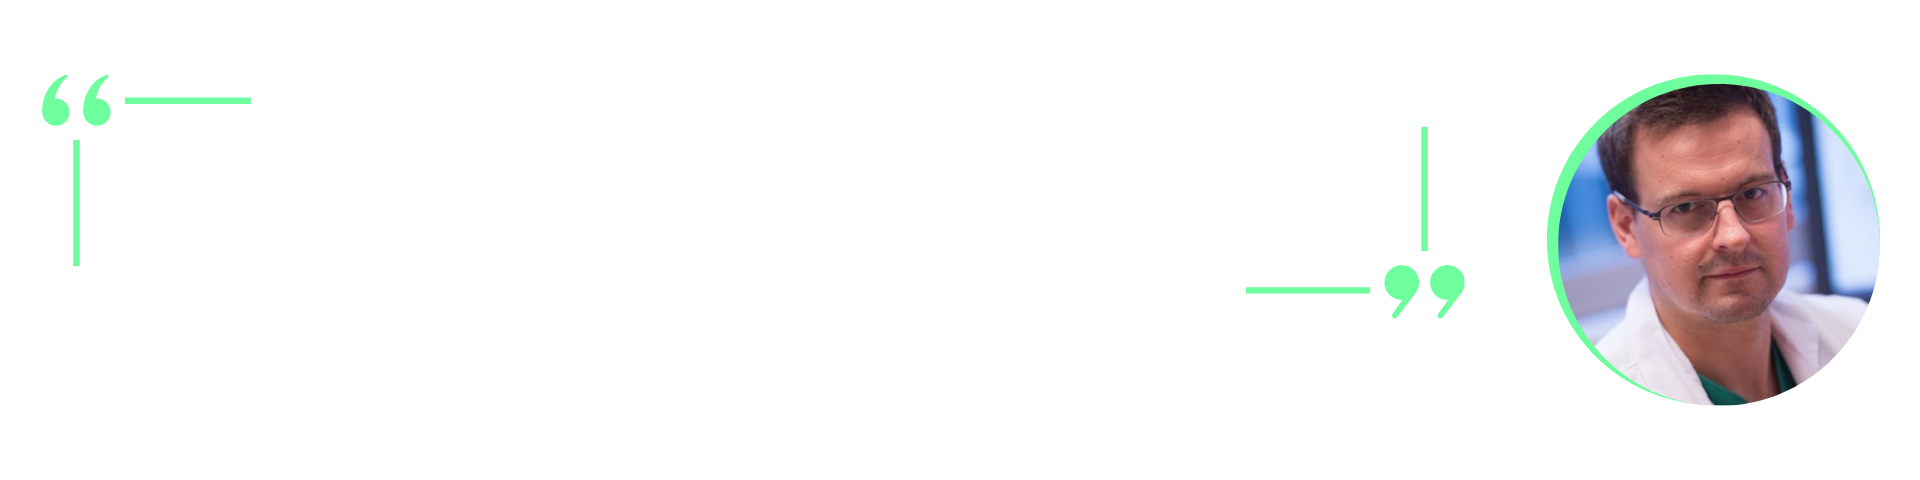 Doctor Jean-Christophe Gentric's quotation “I'll trend to avoid any open-cell and y stenting [...] because if you have to come back and facing the open-cell it's going to be a mess”